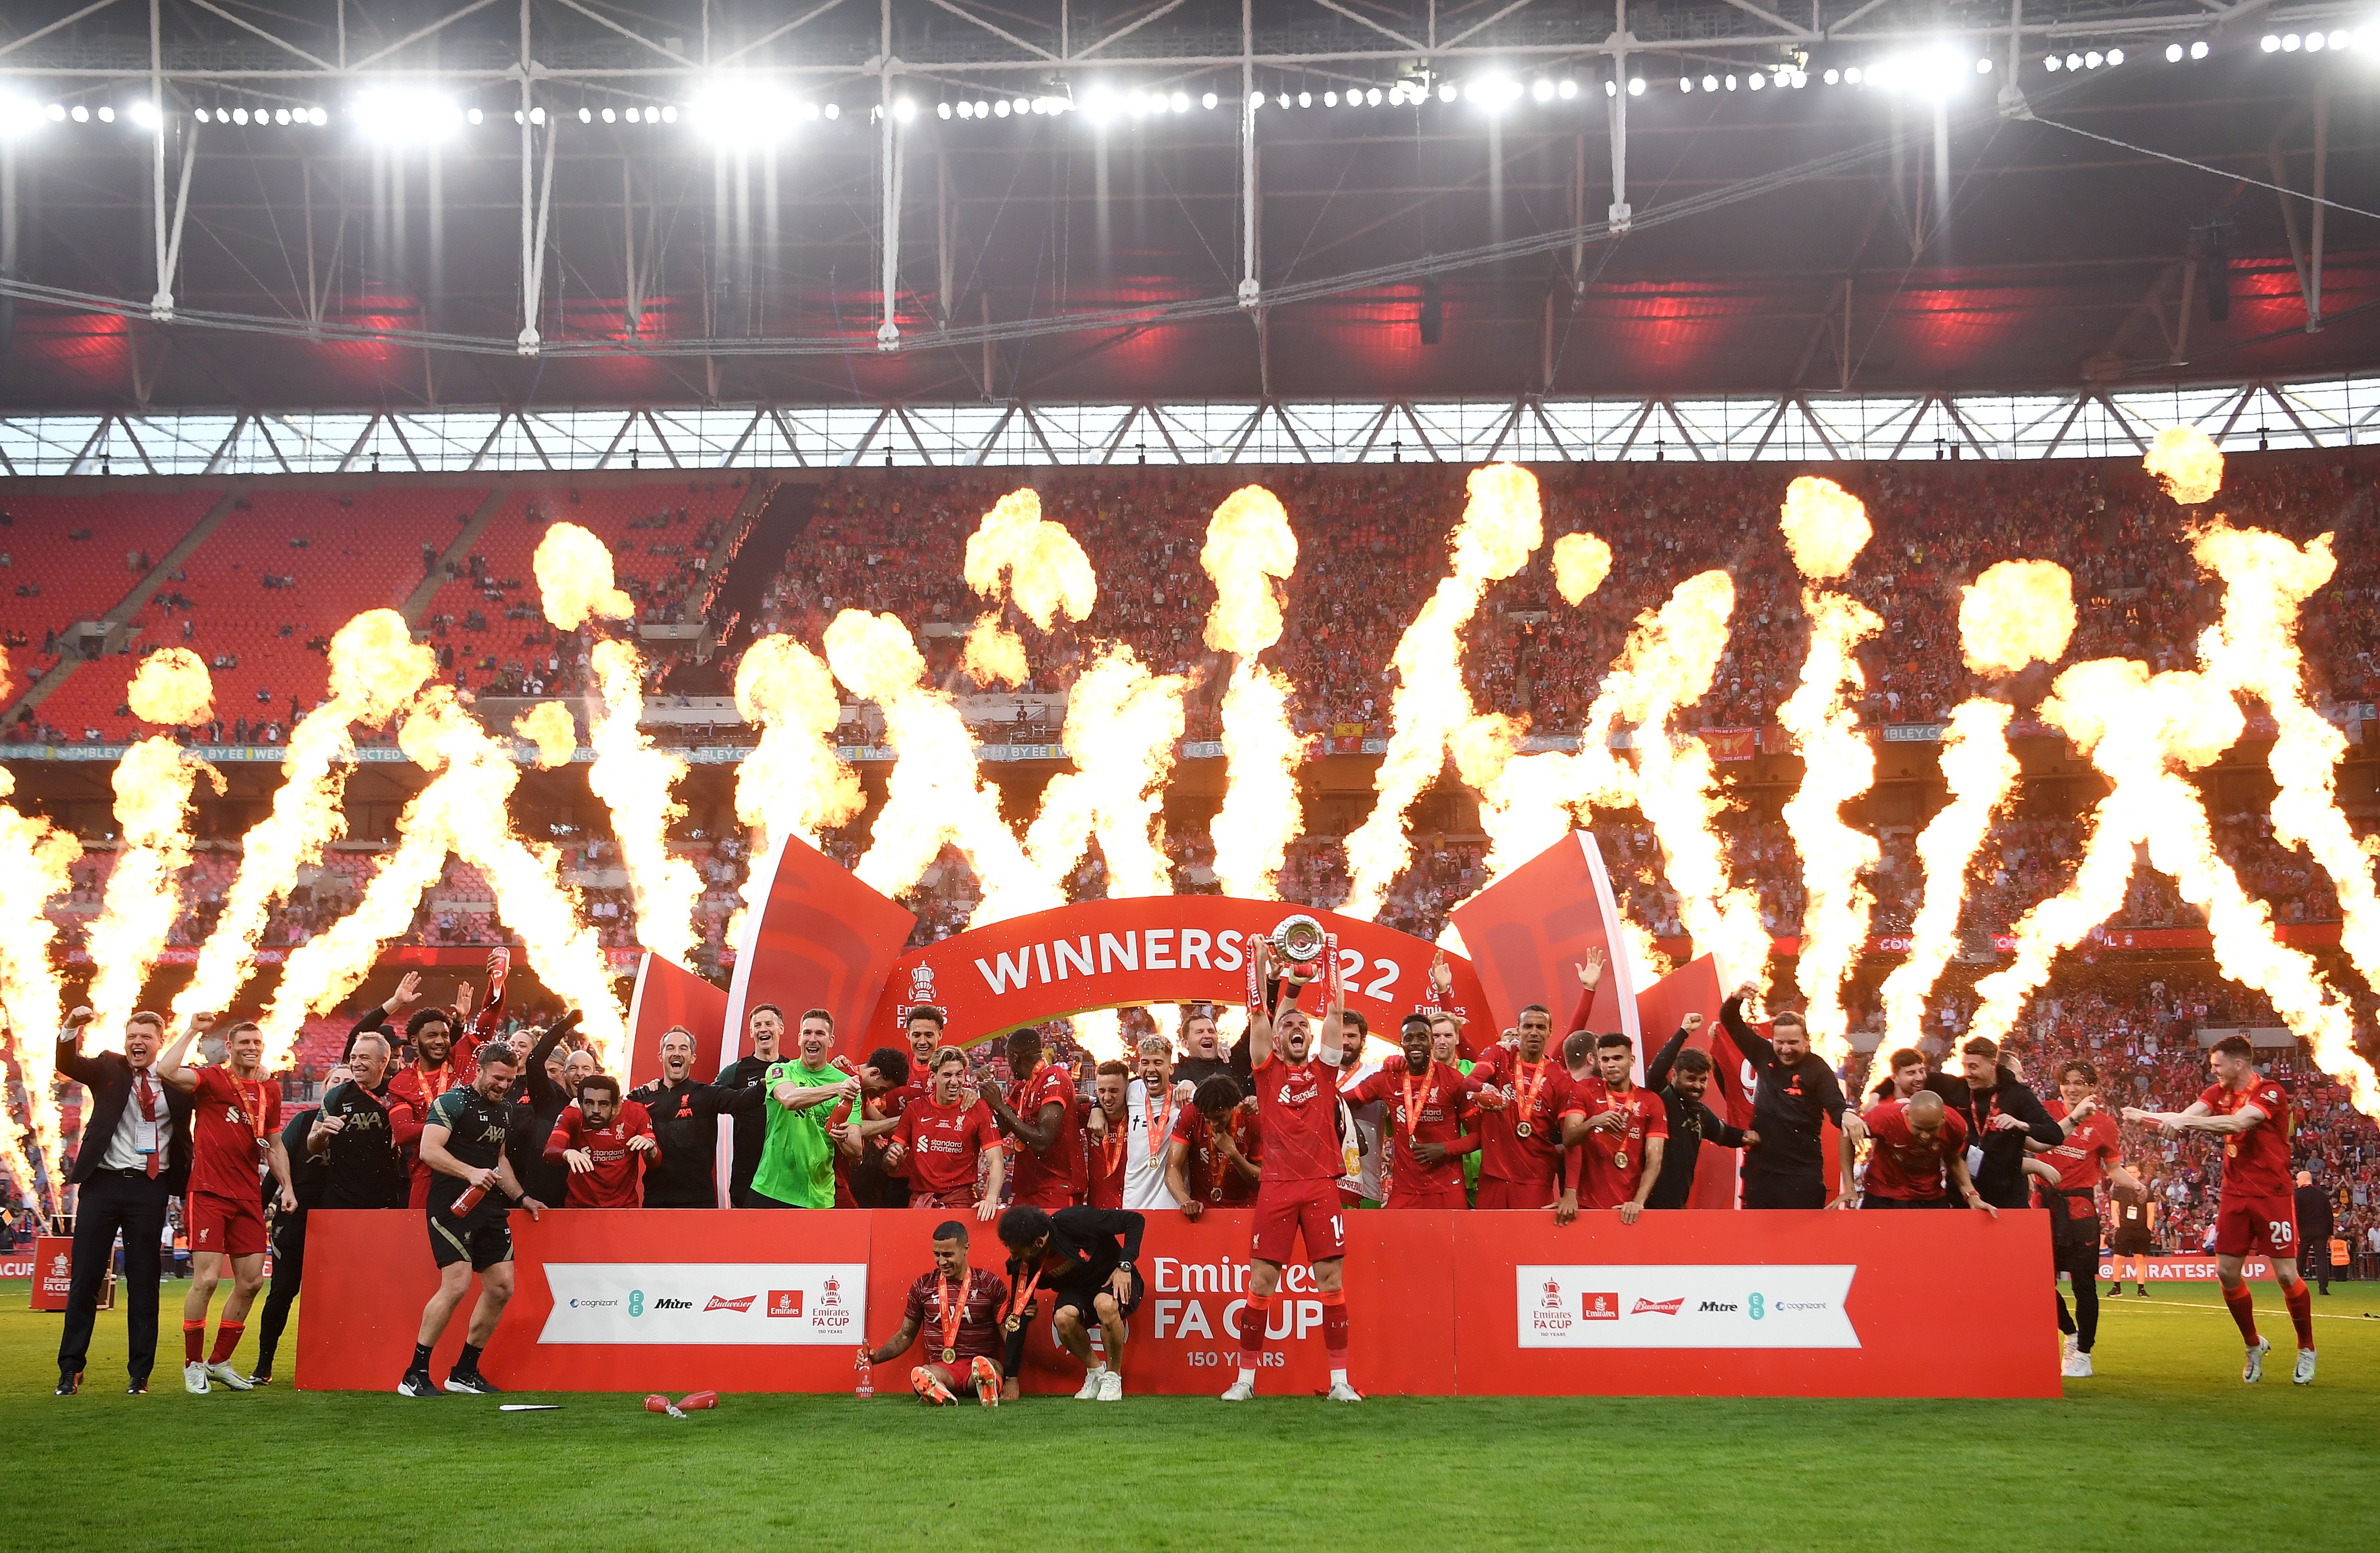 Jordan Henderson of Liverpool lifts The Emirates FA Cup trophy after their sides victory during The FA Cup Final match between Chelsea and Liverpool at Wembley Stadium on May 14, 2022 in London, England. (Photo by Shaun Botterill/Getty Images)